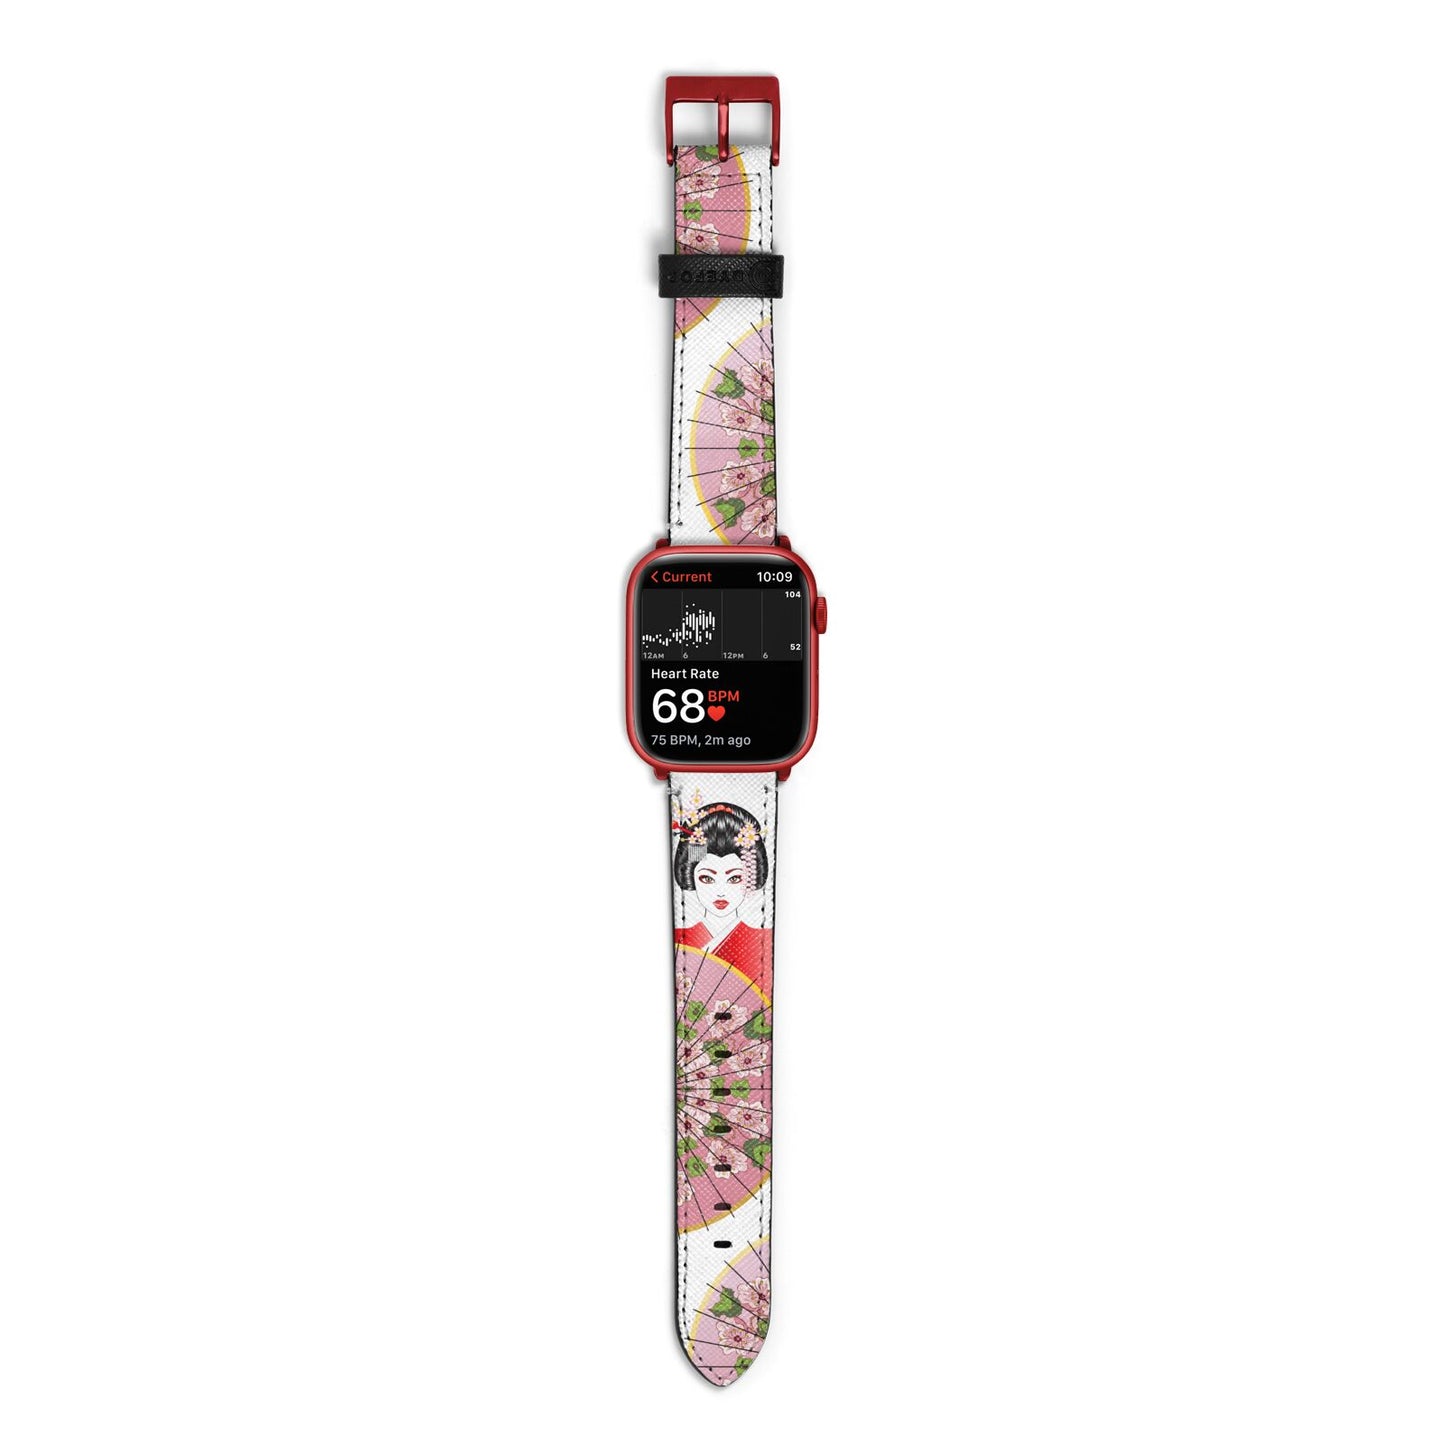 Geisha Girl Apple Watch Strap Size 38mm with Red Hardware